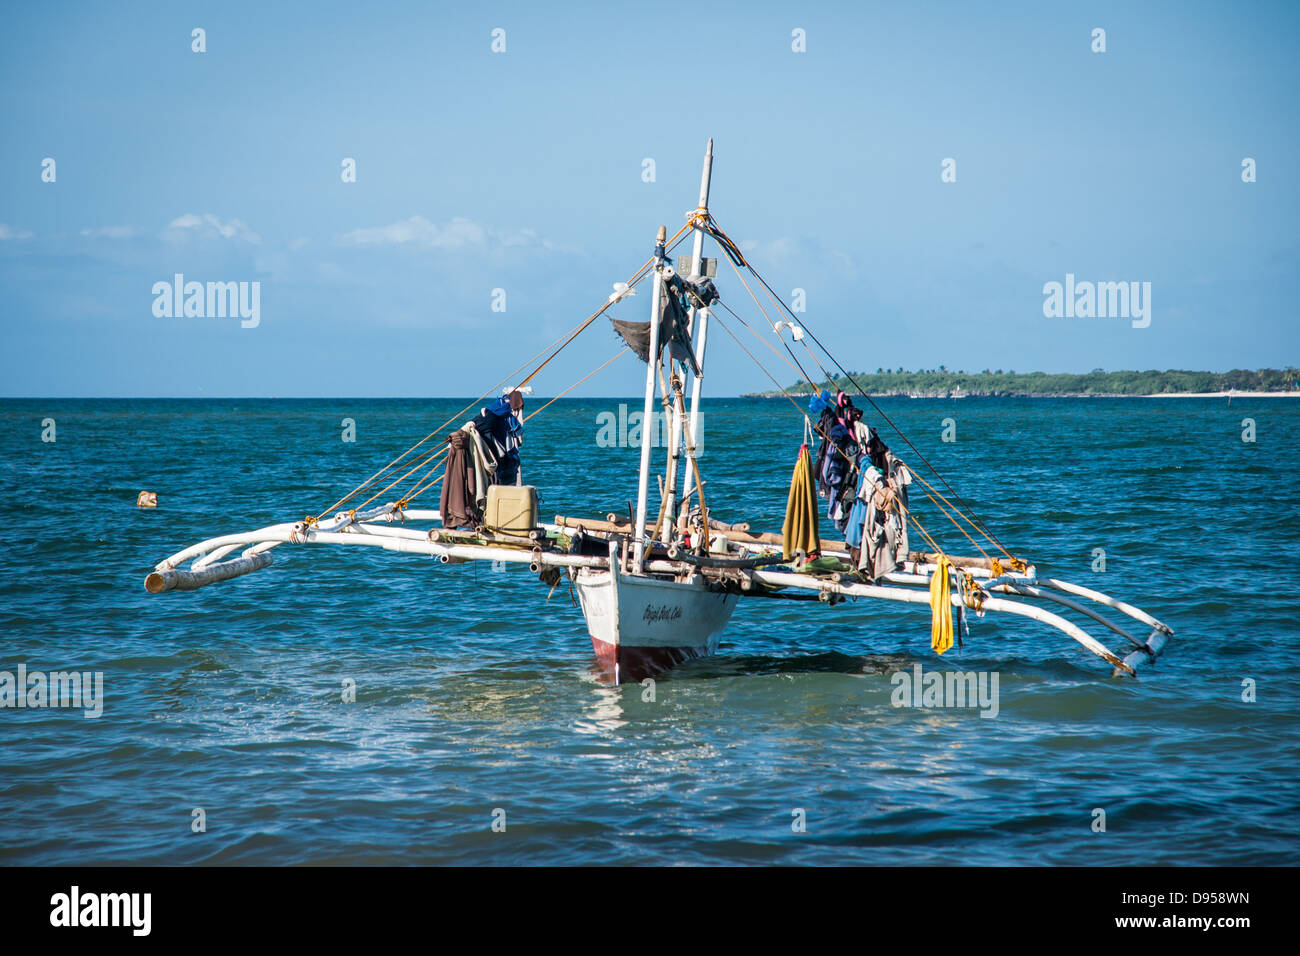 Drying clothes on traditional Filipino fishing boat with outriggers at Baigad Beach, Santa Fe, Bantayan, Philippines Stock Photo